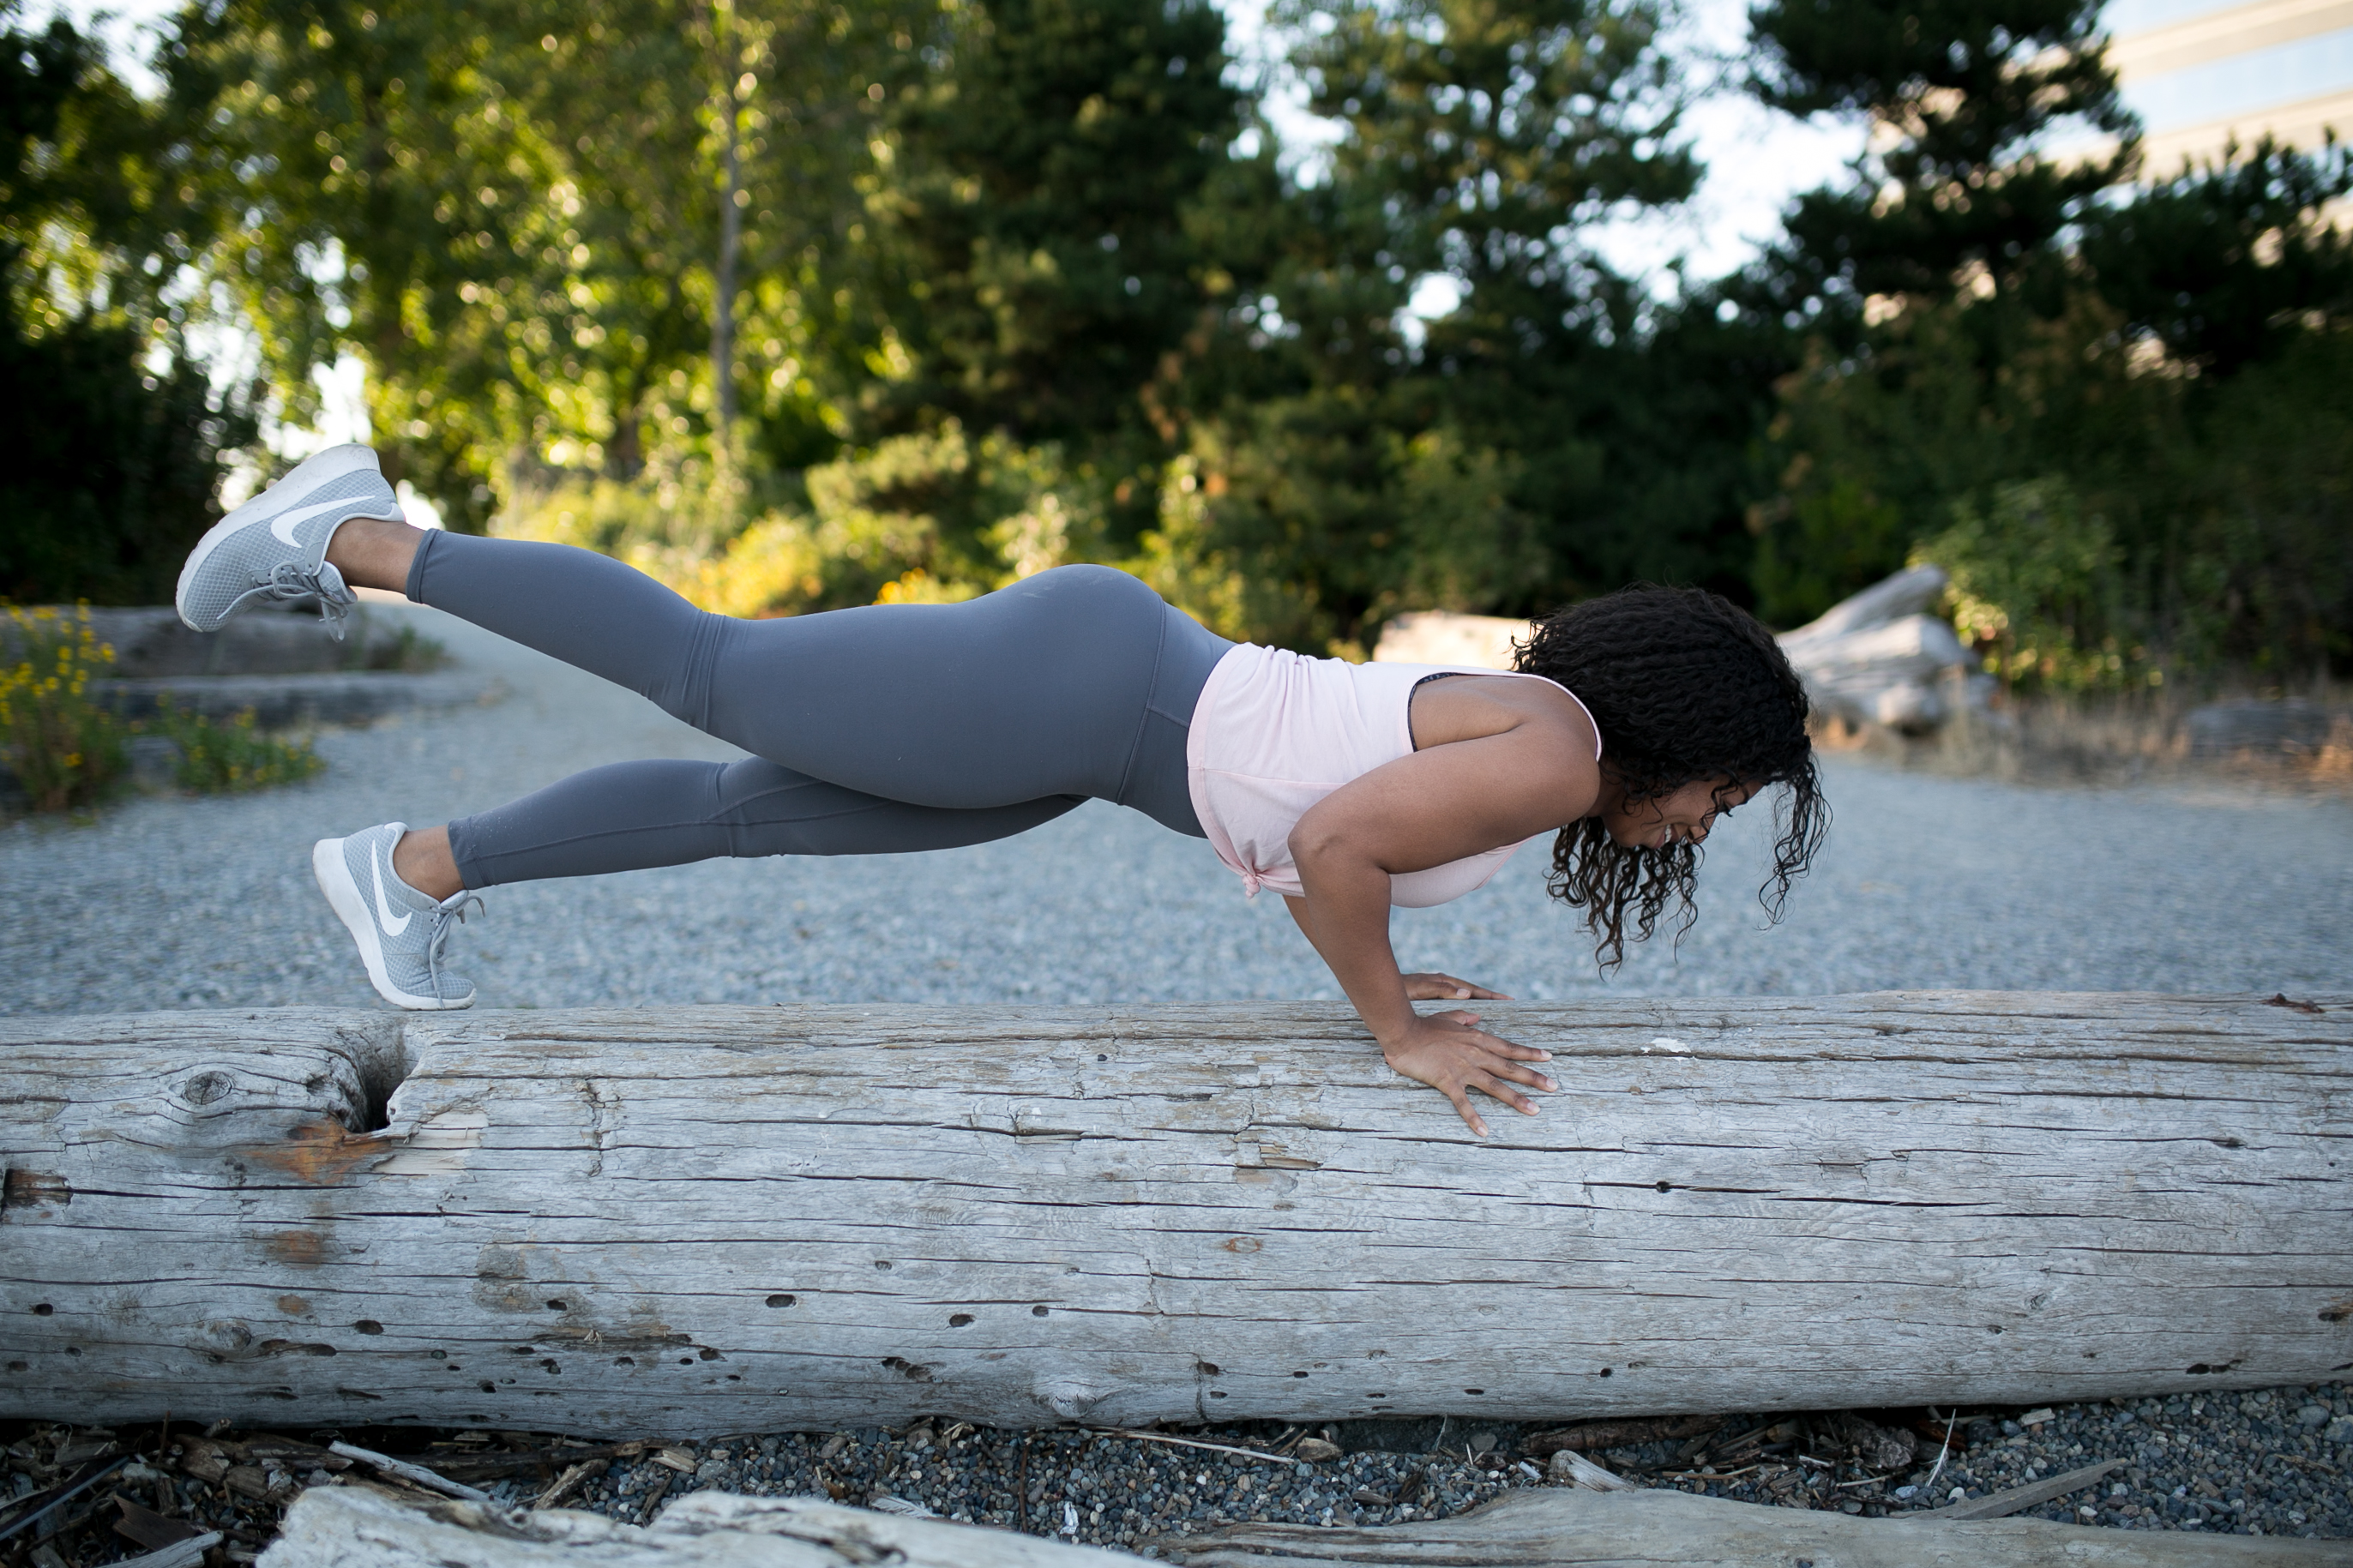 Although this workout doesn’t require any equipment, it packs a serious punch! This bodyweight workout will strengthen and tone your entire body from head to toe.